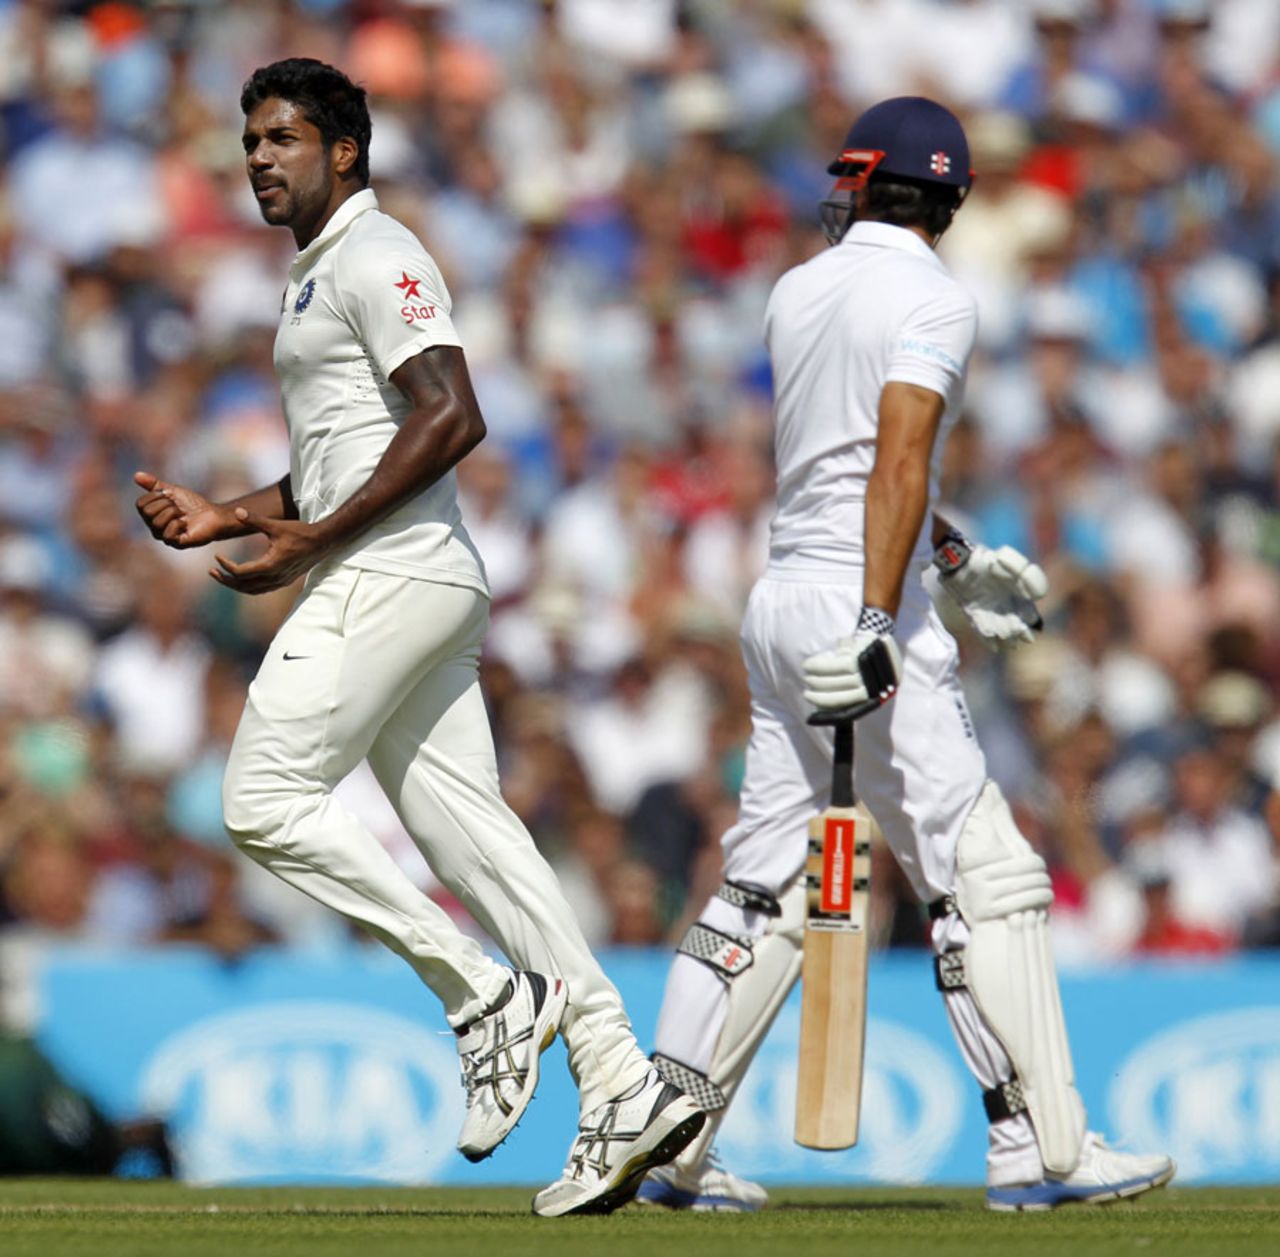 Varun Aaron finally had Alastair Cook caught at slip, England v India, 5th Investec Test, The Oval, 2nd day, August 16, 2014